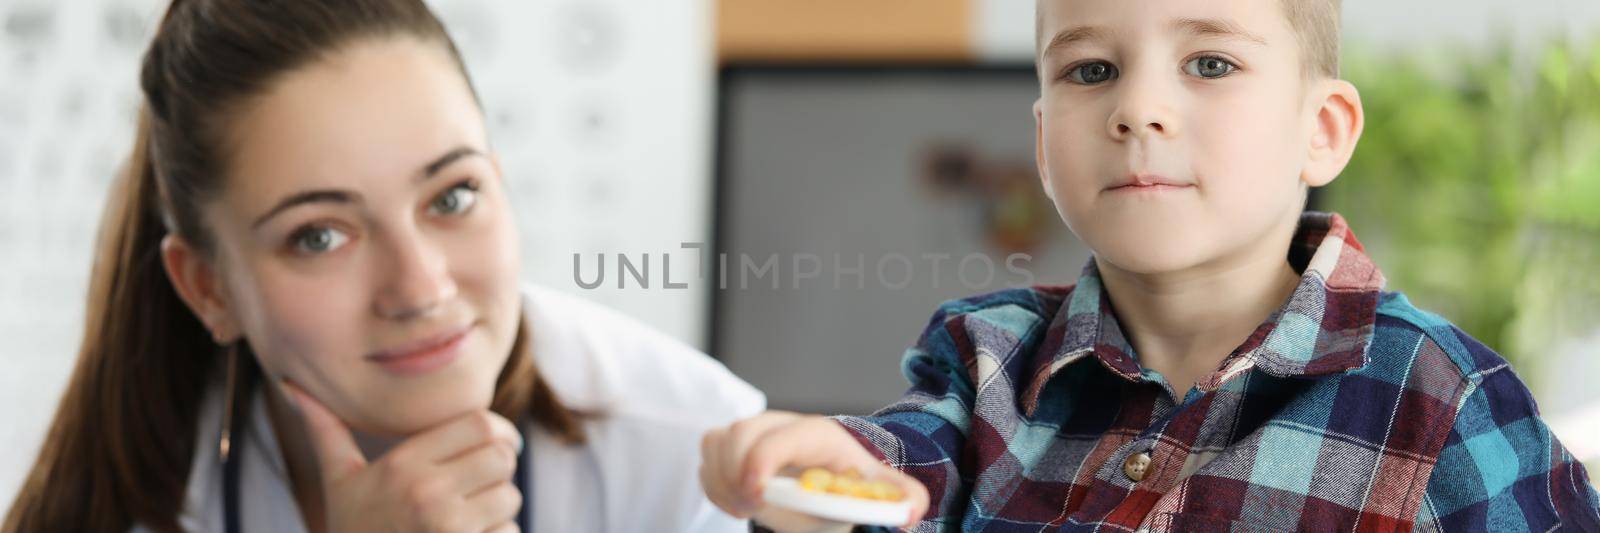 Little boy holding yellow gelatin capsules at doctor appointment. Taking vitamin D and preventing rickets in children concept